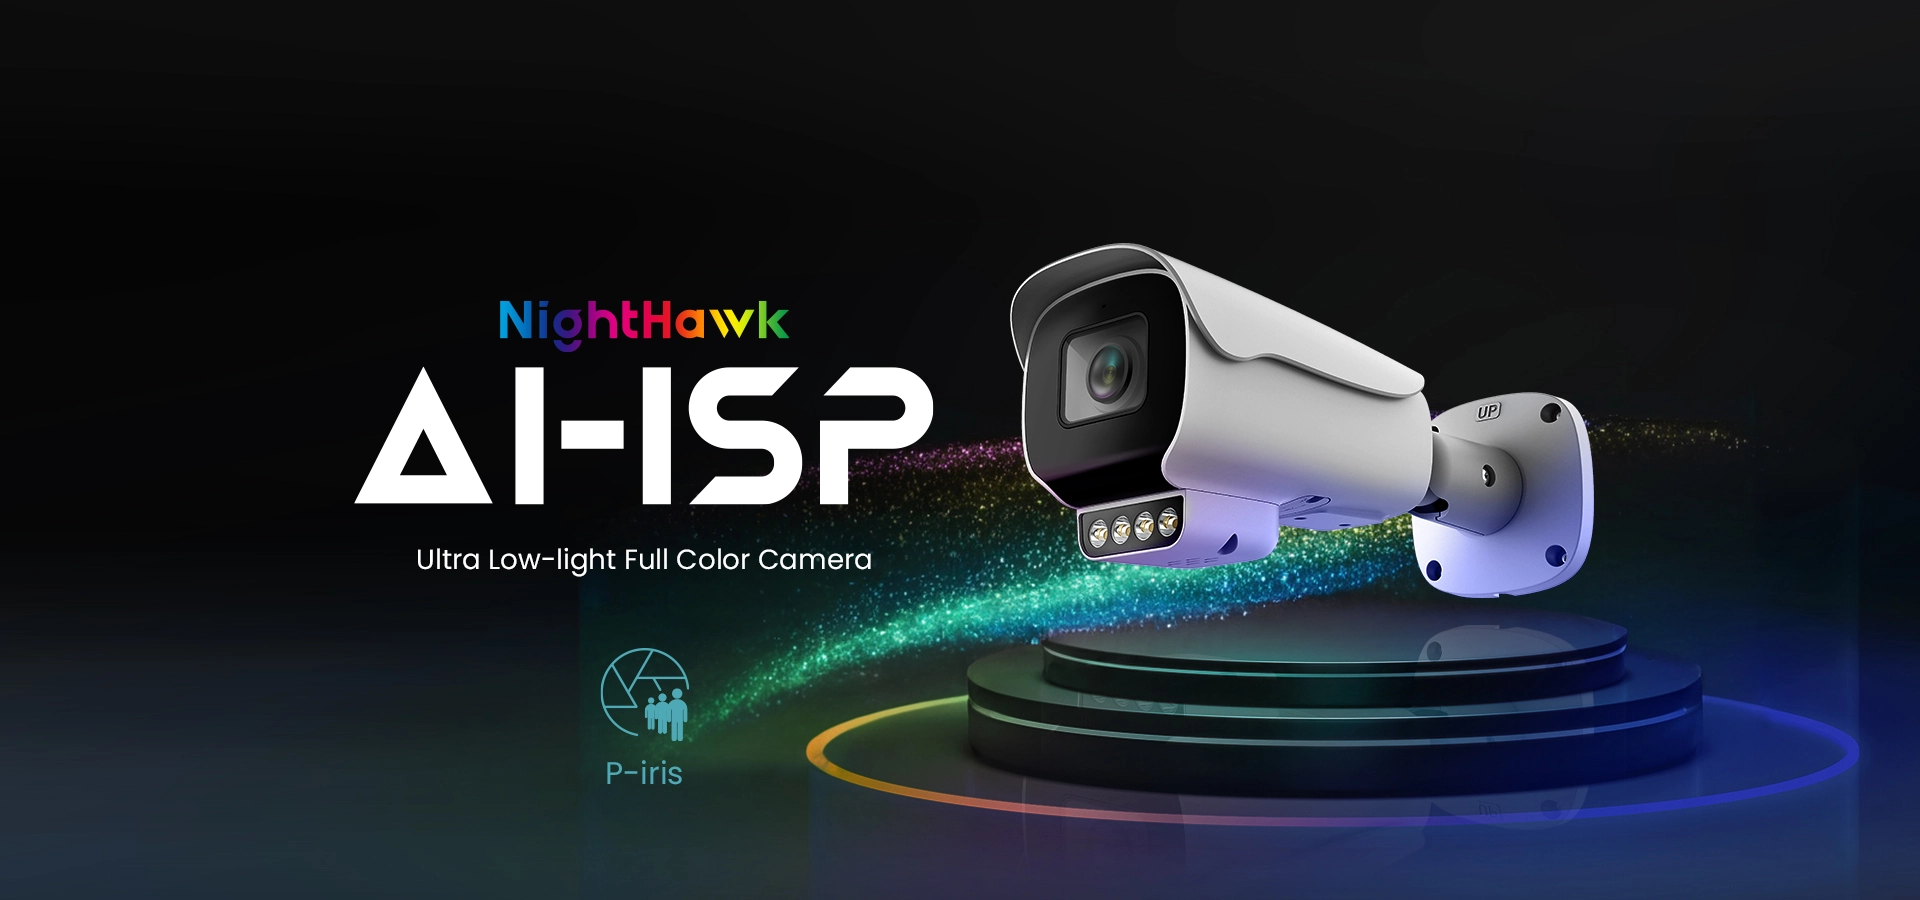 Sunell Nighthawk Ultra-low-light Intelligent Full-color Bullet Camera - -Capture crystal-clear images in ultra-low-light environments, all without the need for supplementary lighting minimal motion blur.